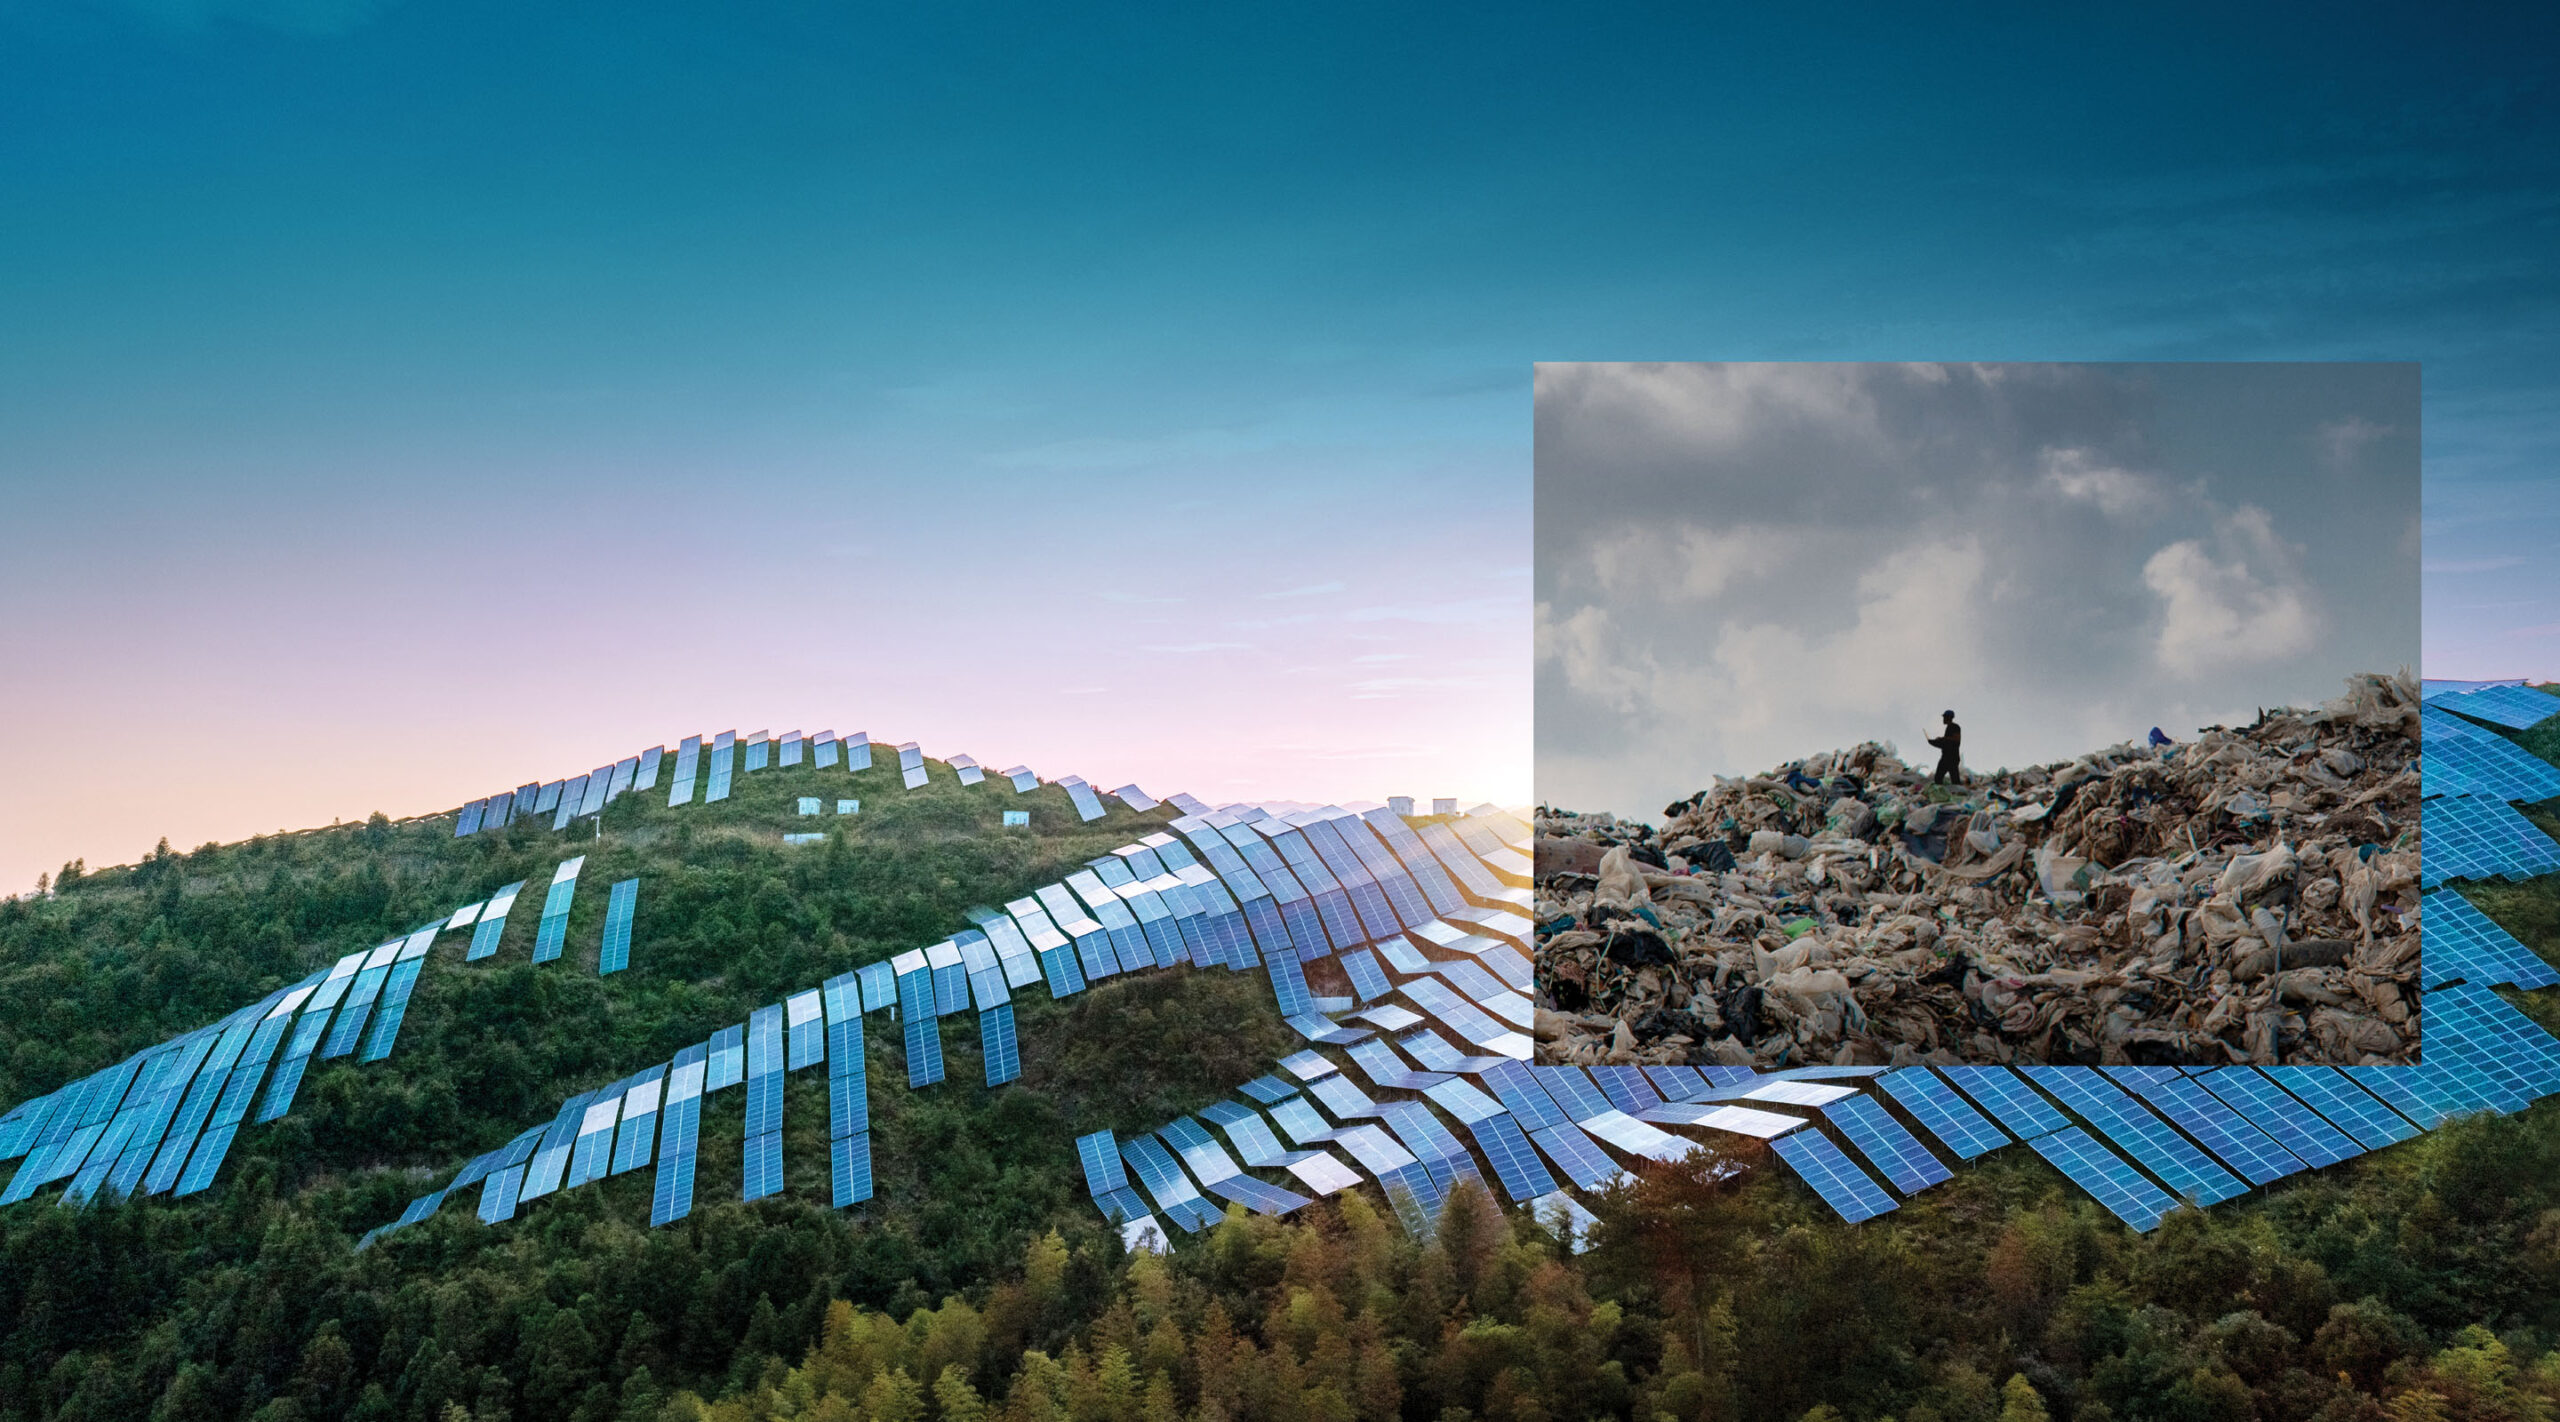 A litter tip is shown next to a hill covered in solar panels.